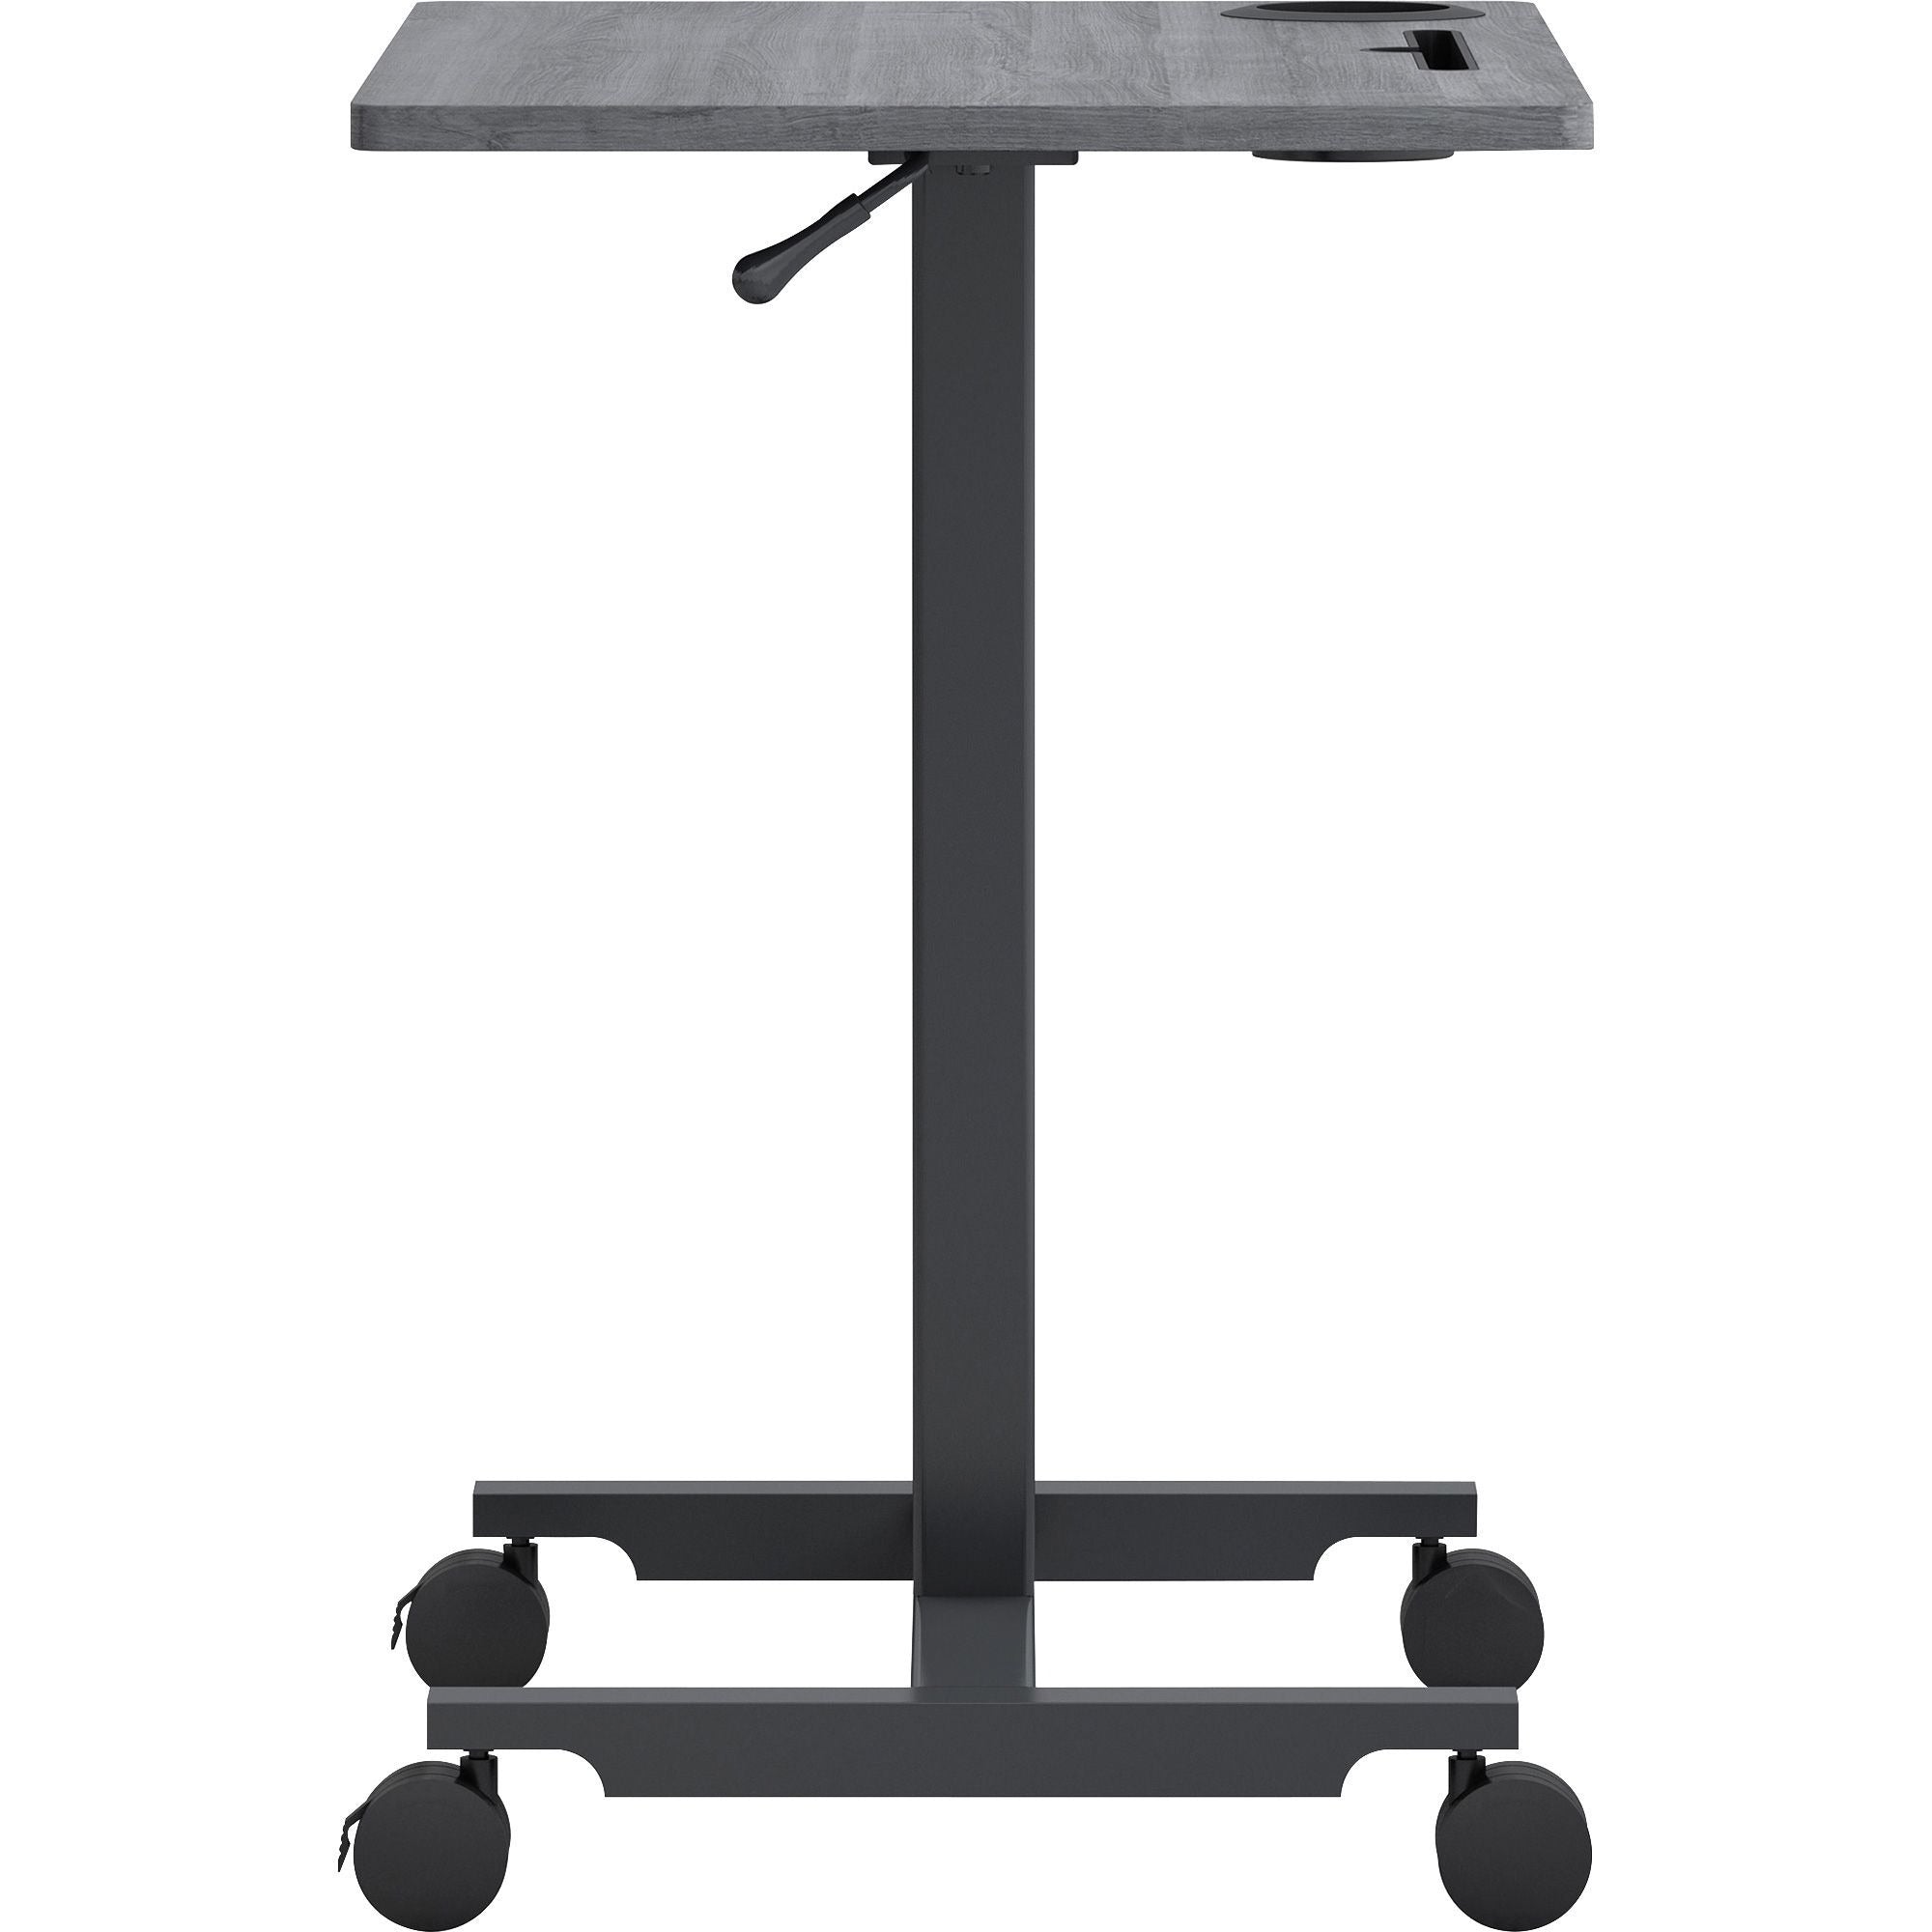 lorell-height-adjustable-mobile-desk-for-table-topweathered-charcoal-laminate-top-powder-coated-base-adjustable-height-30-to-4363-adjustment-43-height-x-2663-width-x-1913-depth-assembly-required-1-each_llr84837 - 5